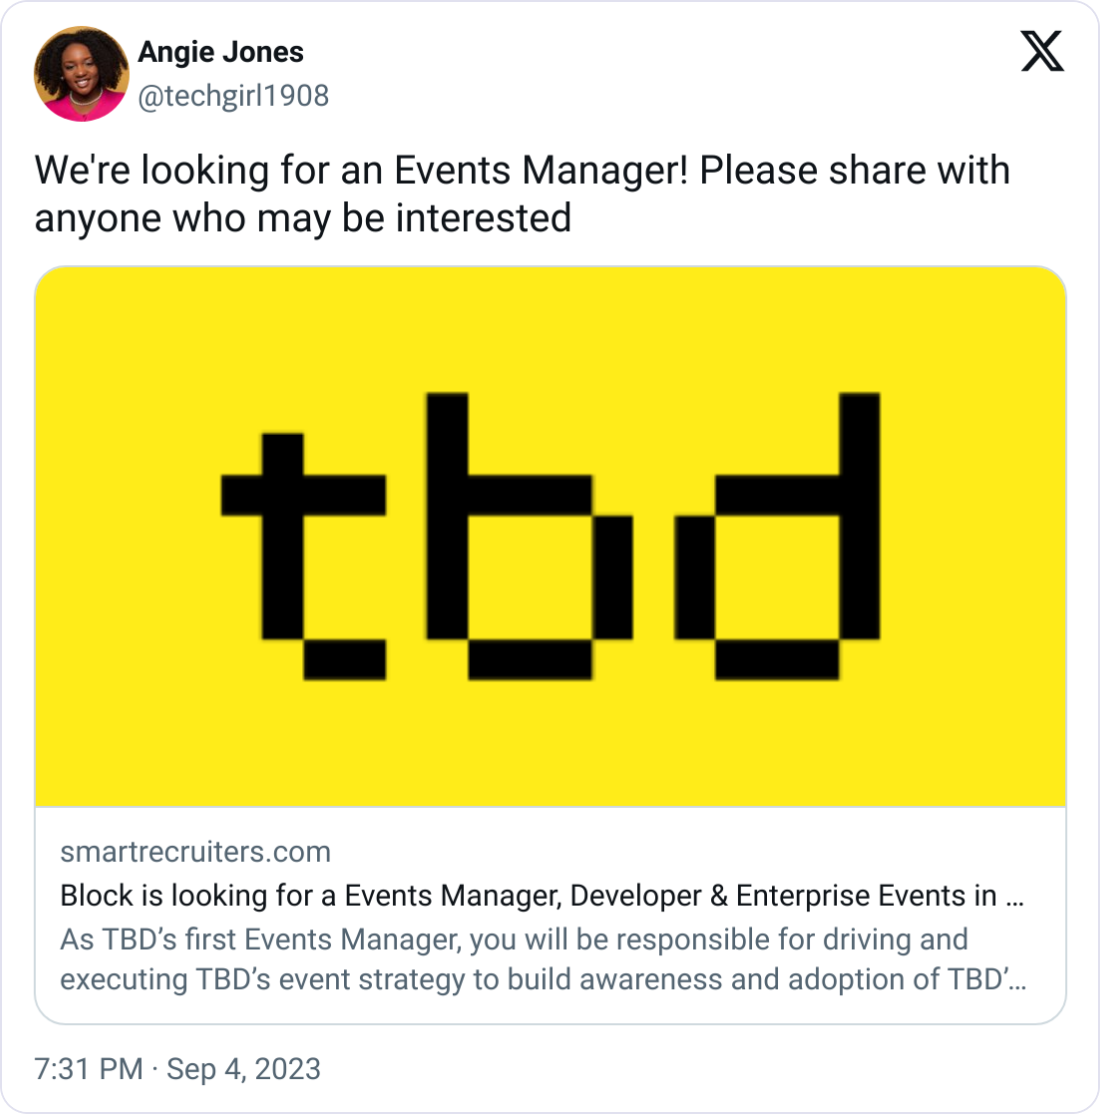  Angie Jones @techgirl1908 We're looking for an Events Manager! Please share with anyone who may be interested smartrecruiters.com Block is looking for a Events Manager, Developer & Enterprise Events in San Francisco, CA, USA As TBD’s first Events Manager, you will be responsible for driving and executing TBD’s event strategy to build awareness and adoption of TBD’s 